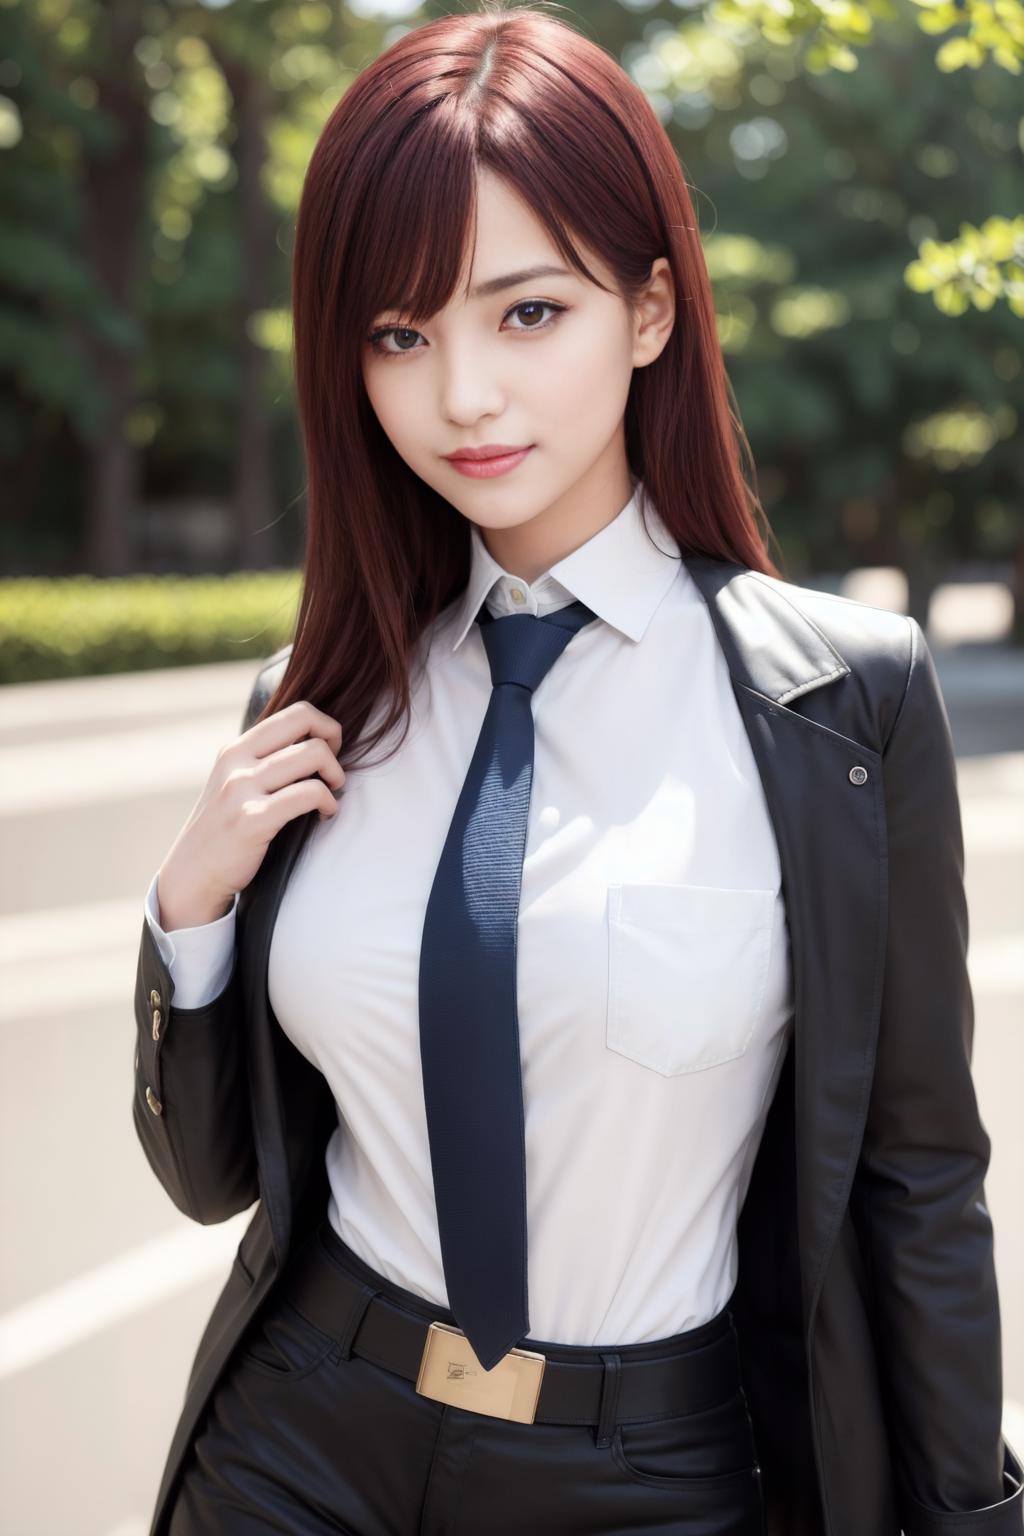 AI model image by georgechiang180